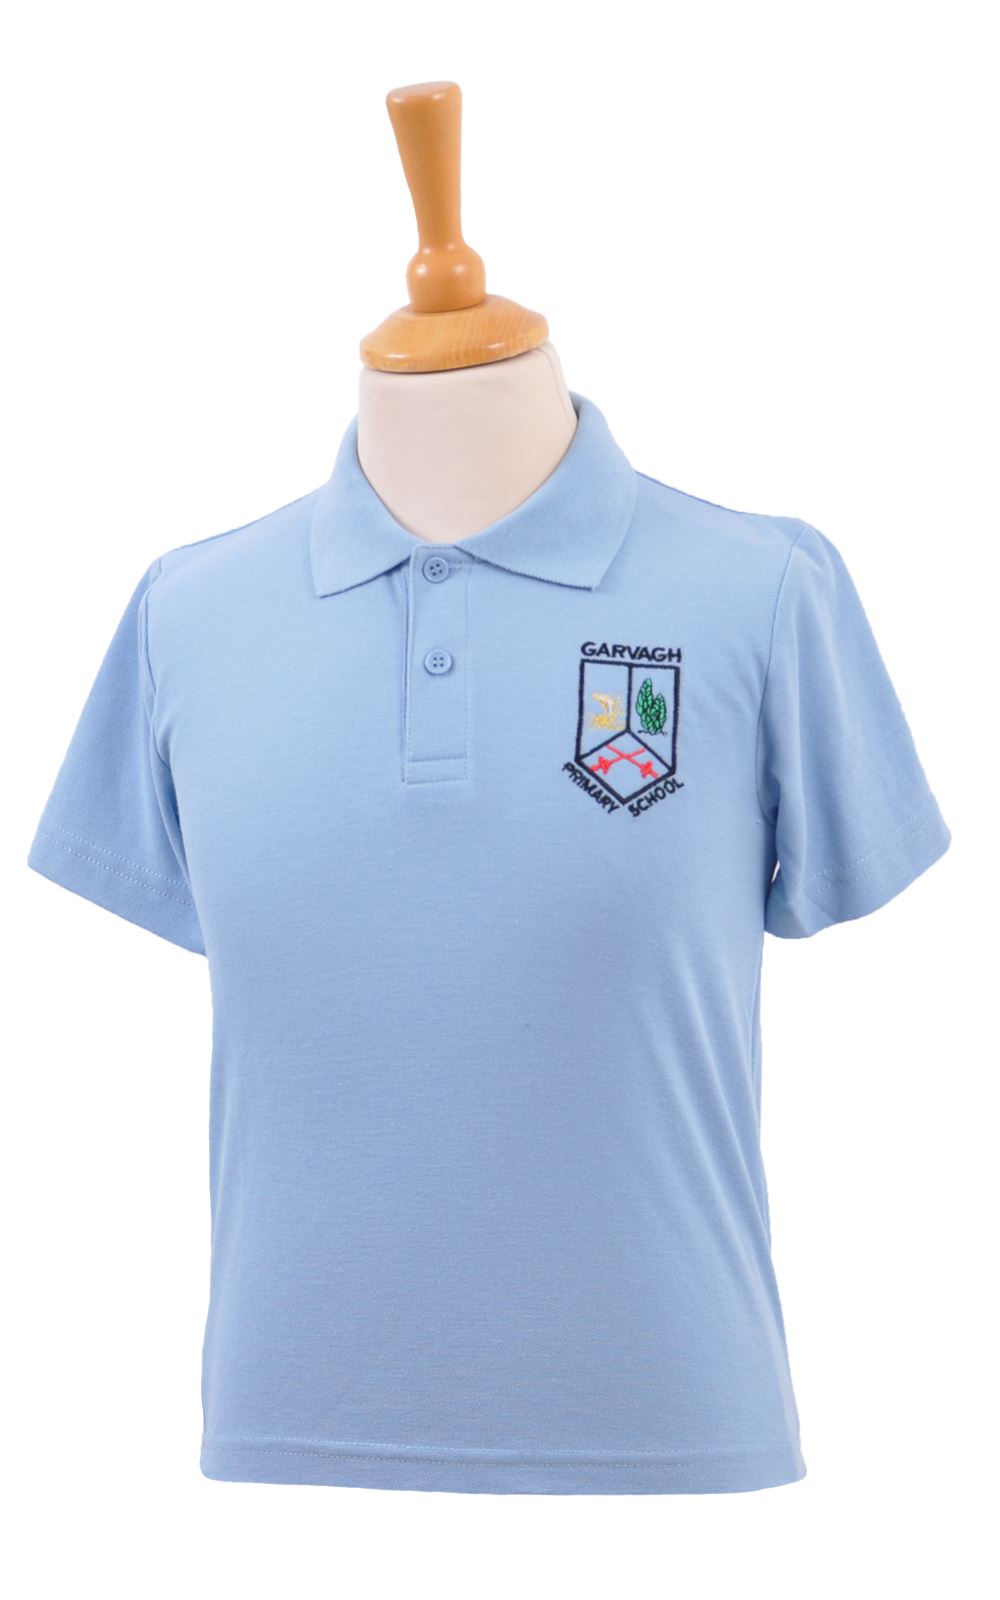 Picture of Garvagh PS Polo Shirt - Woodbank